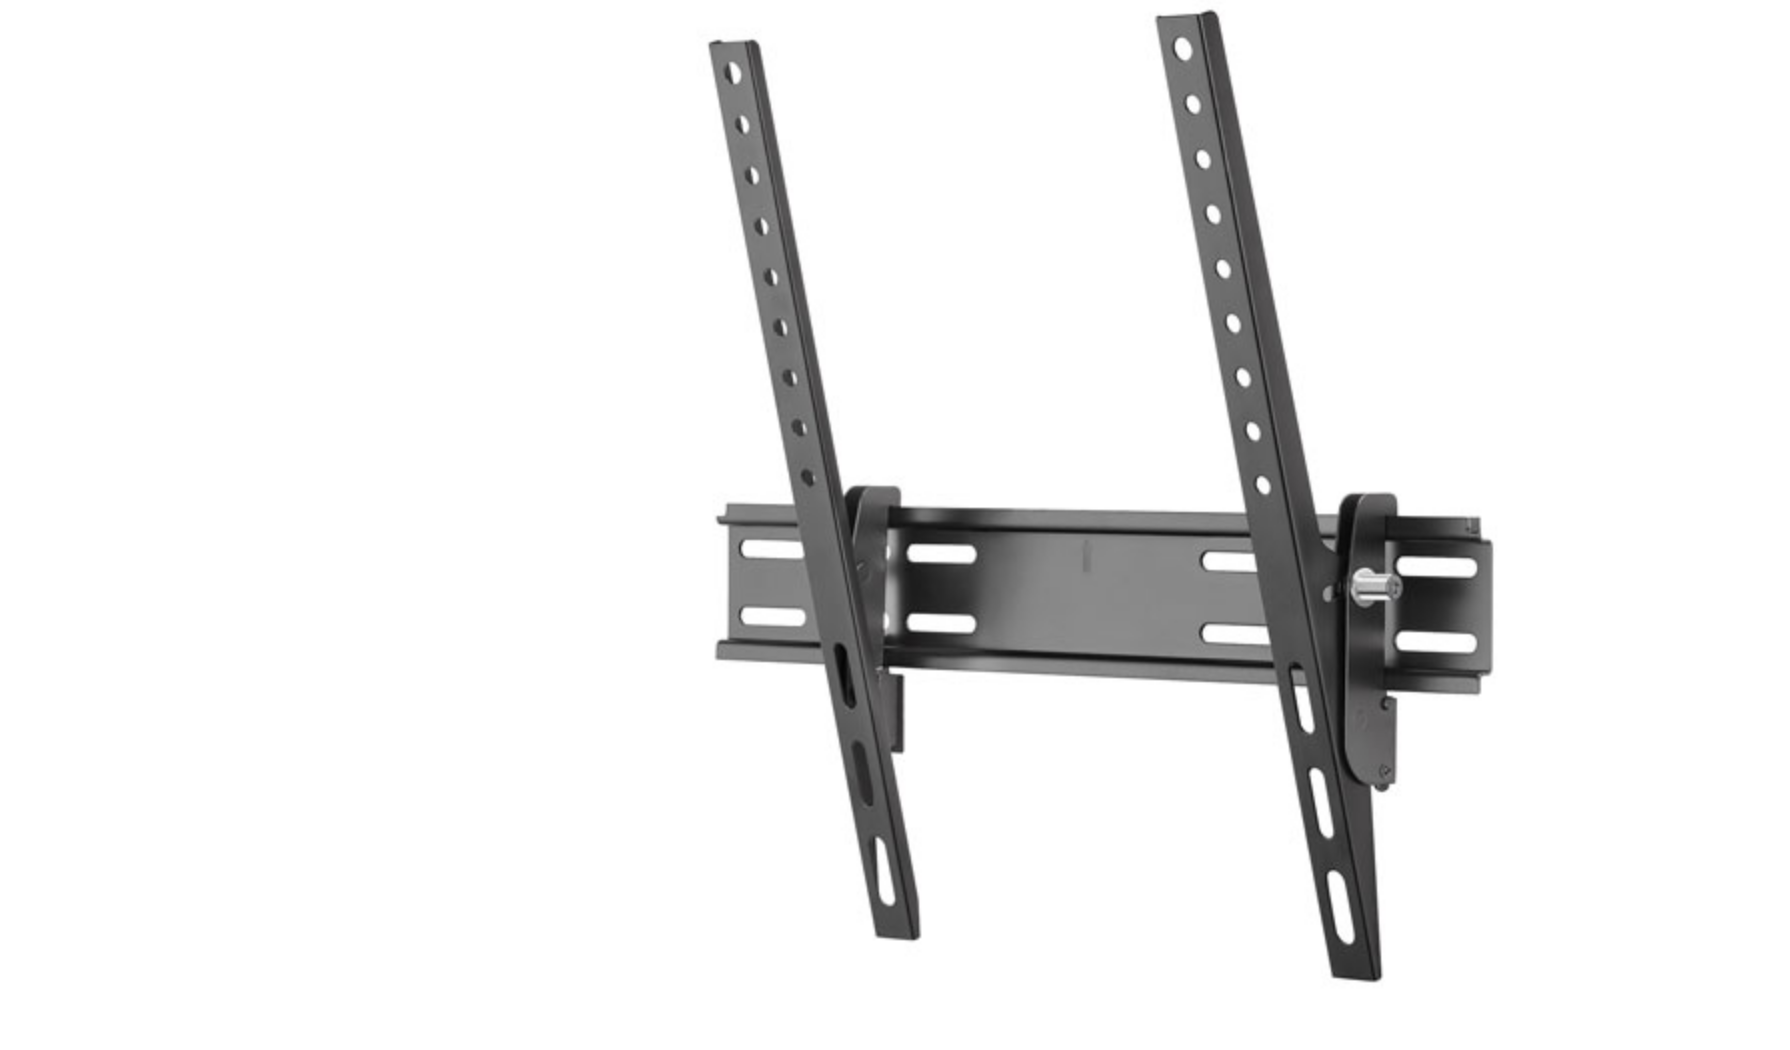 tilting wall mount, safety, home, TV, moving day